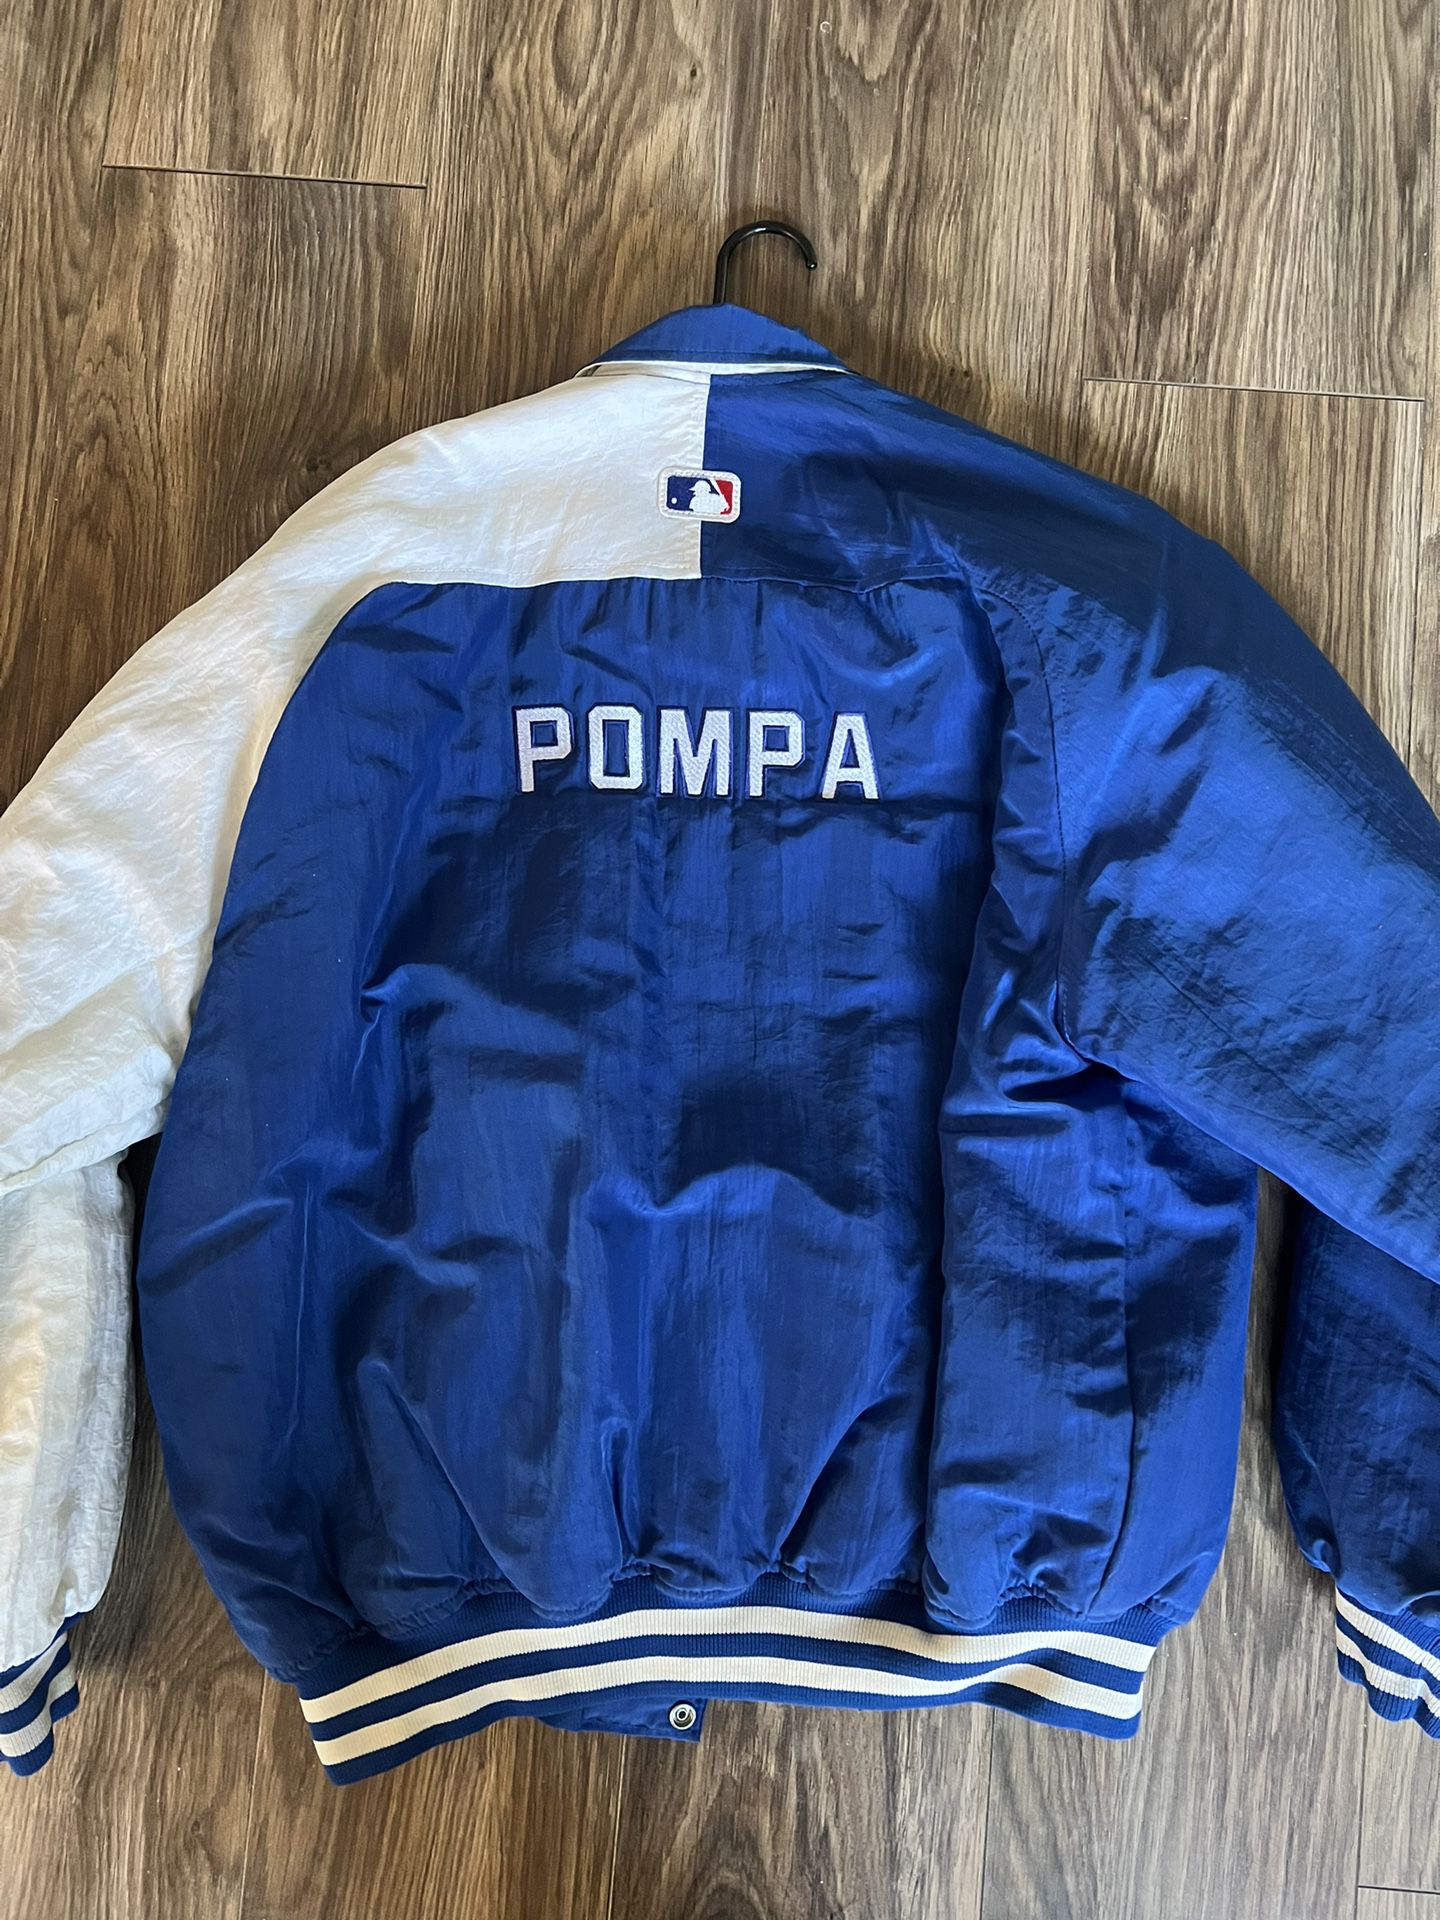 3xl LA Dodgers x Pink Dolphin Stadium Jacket for Sale in Los Angeles, CA -  OfferUp